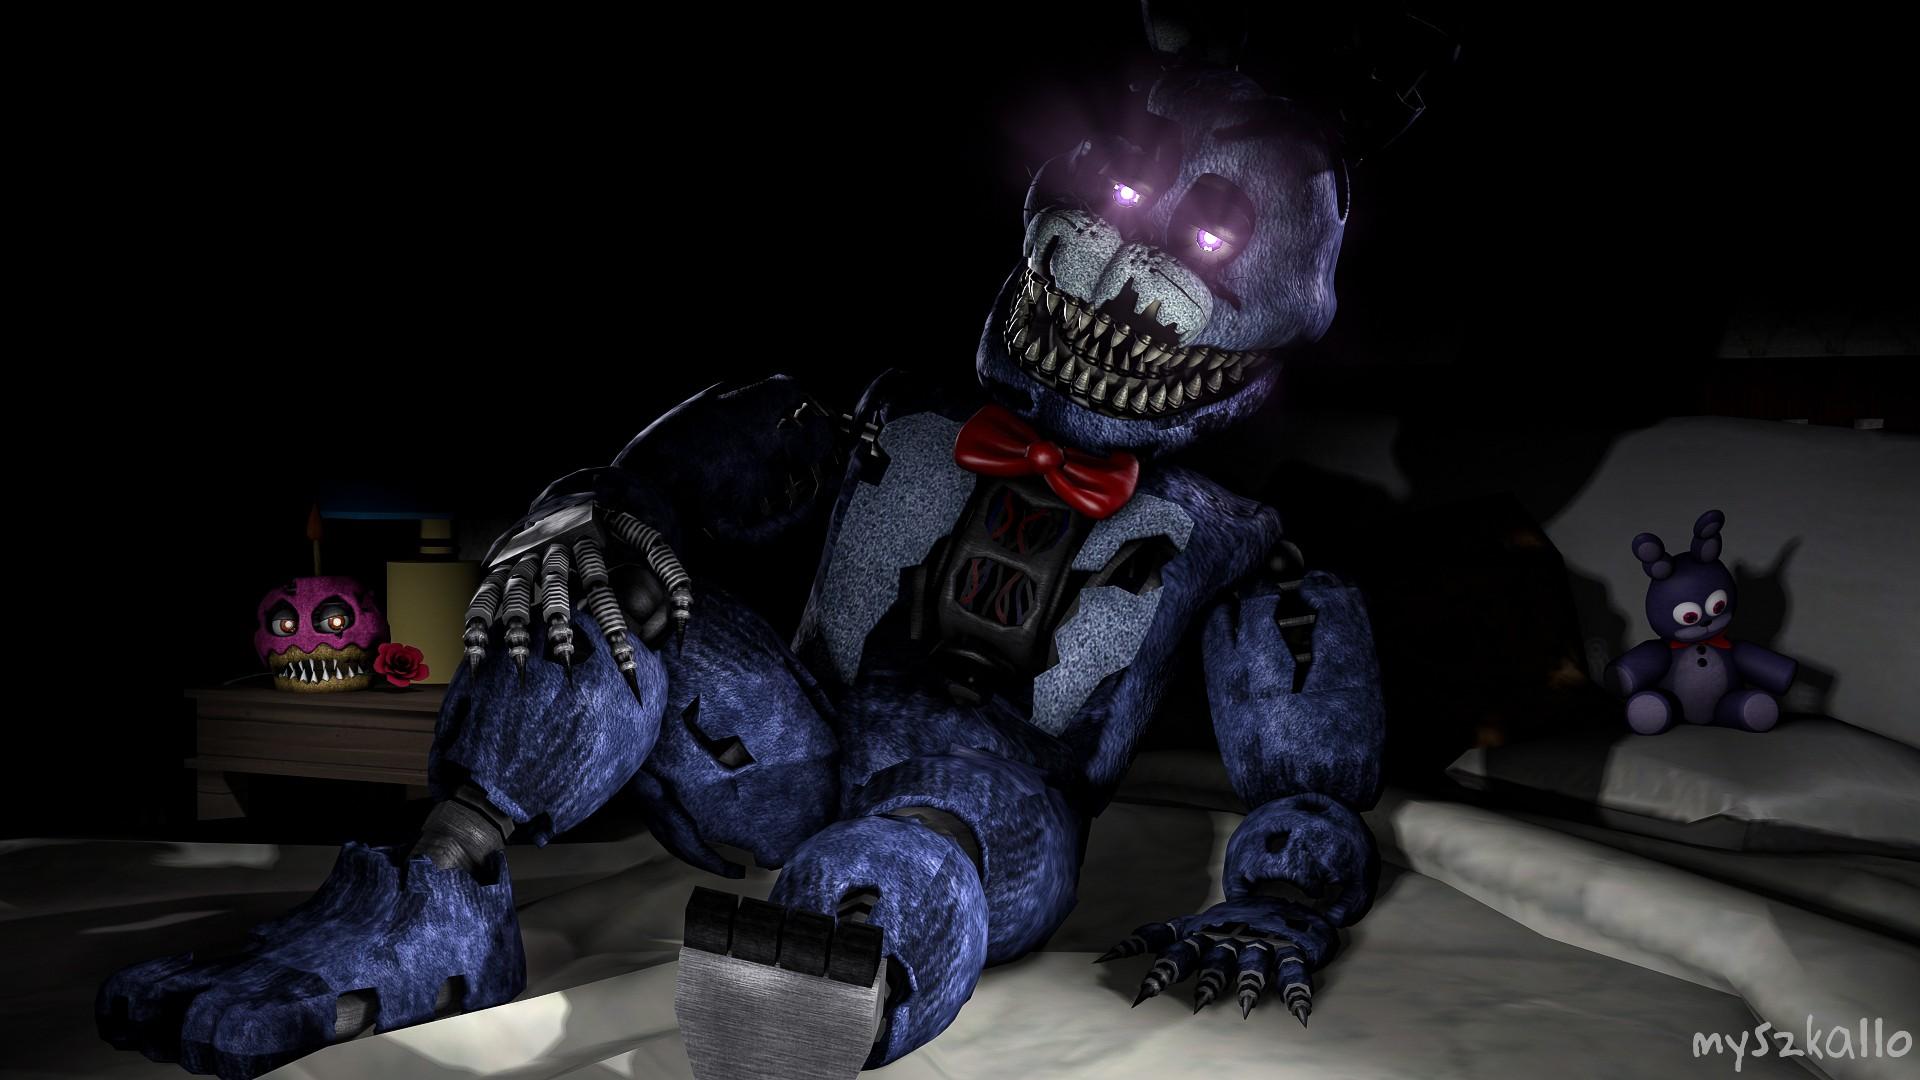 Five Nights At Freddy's 4 Nightmare Bonnie Wallpapers - Wallpaper Cave